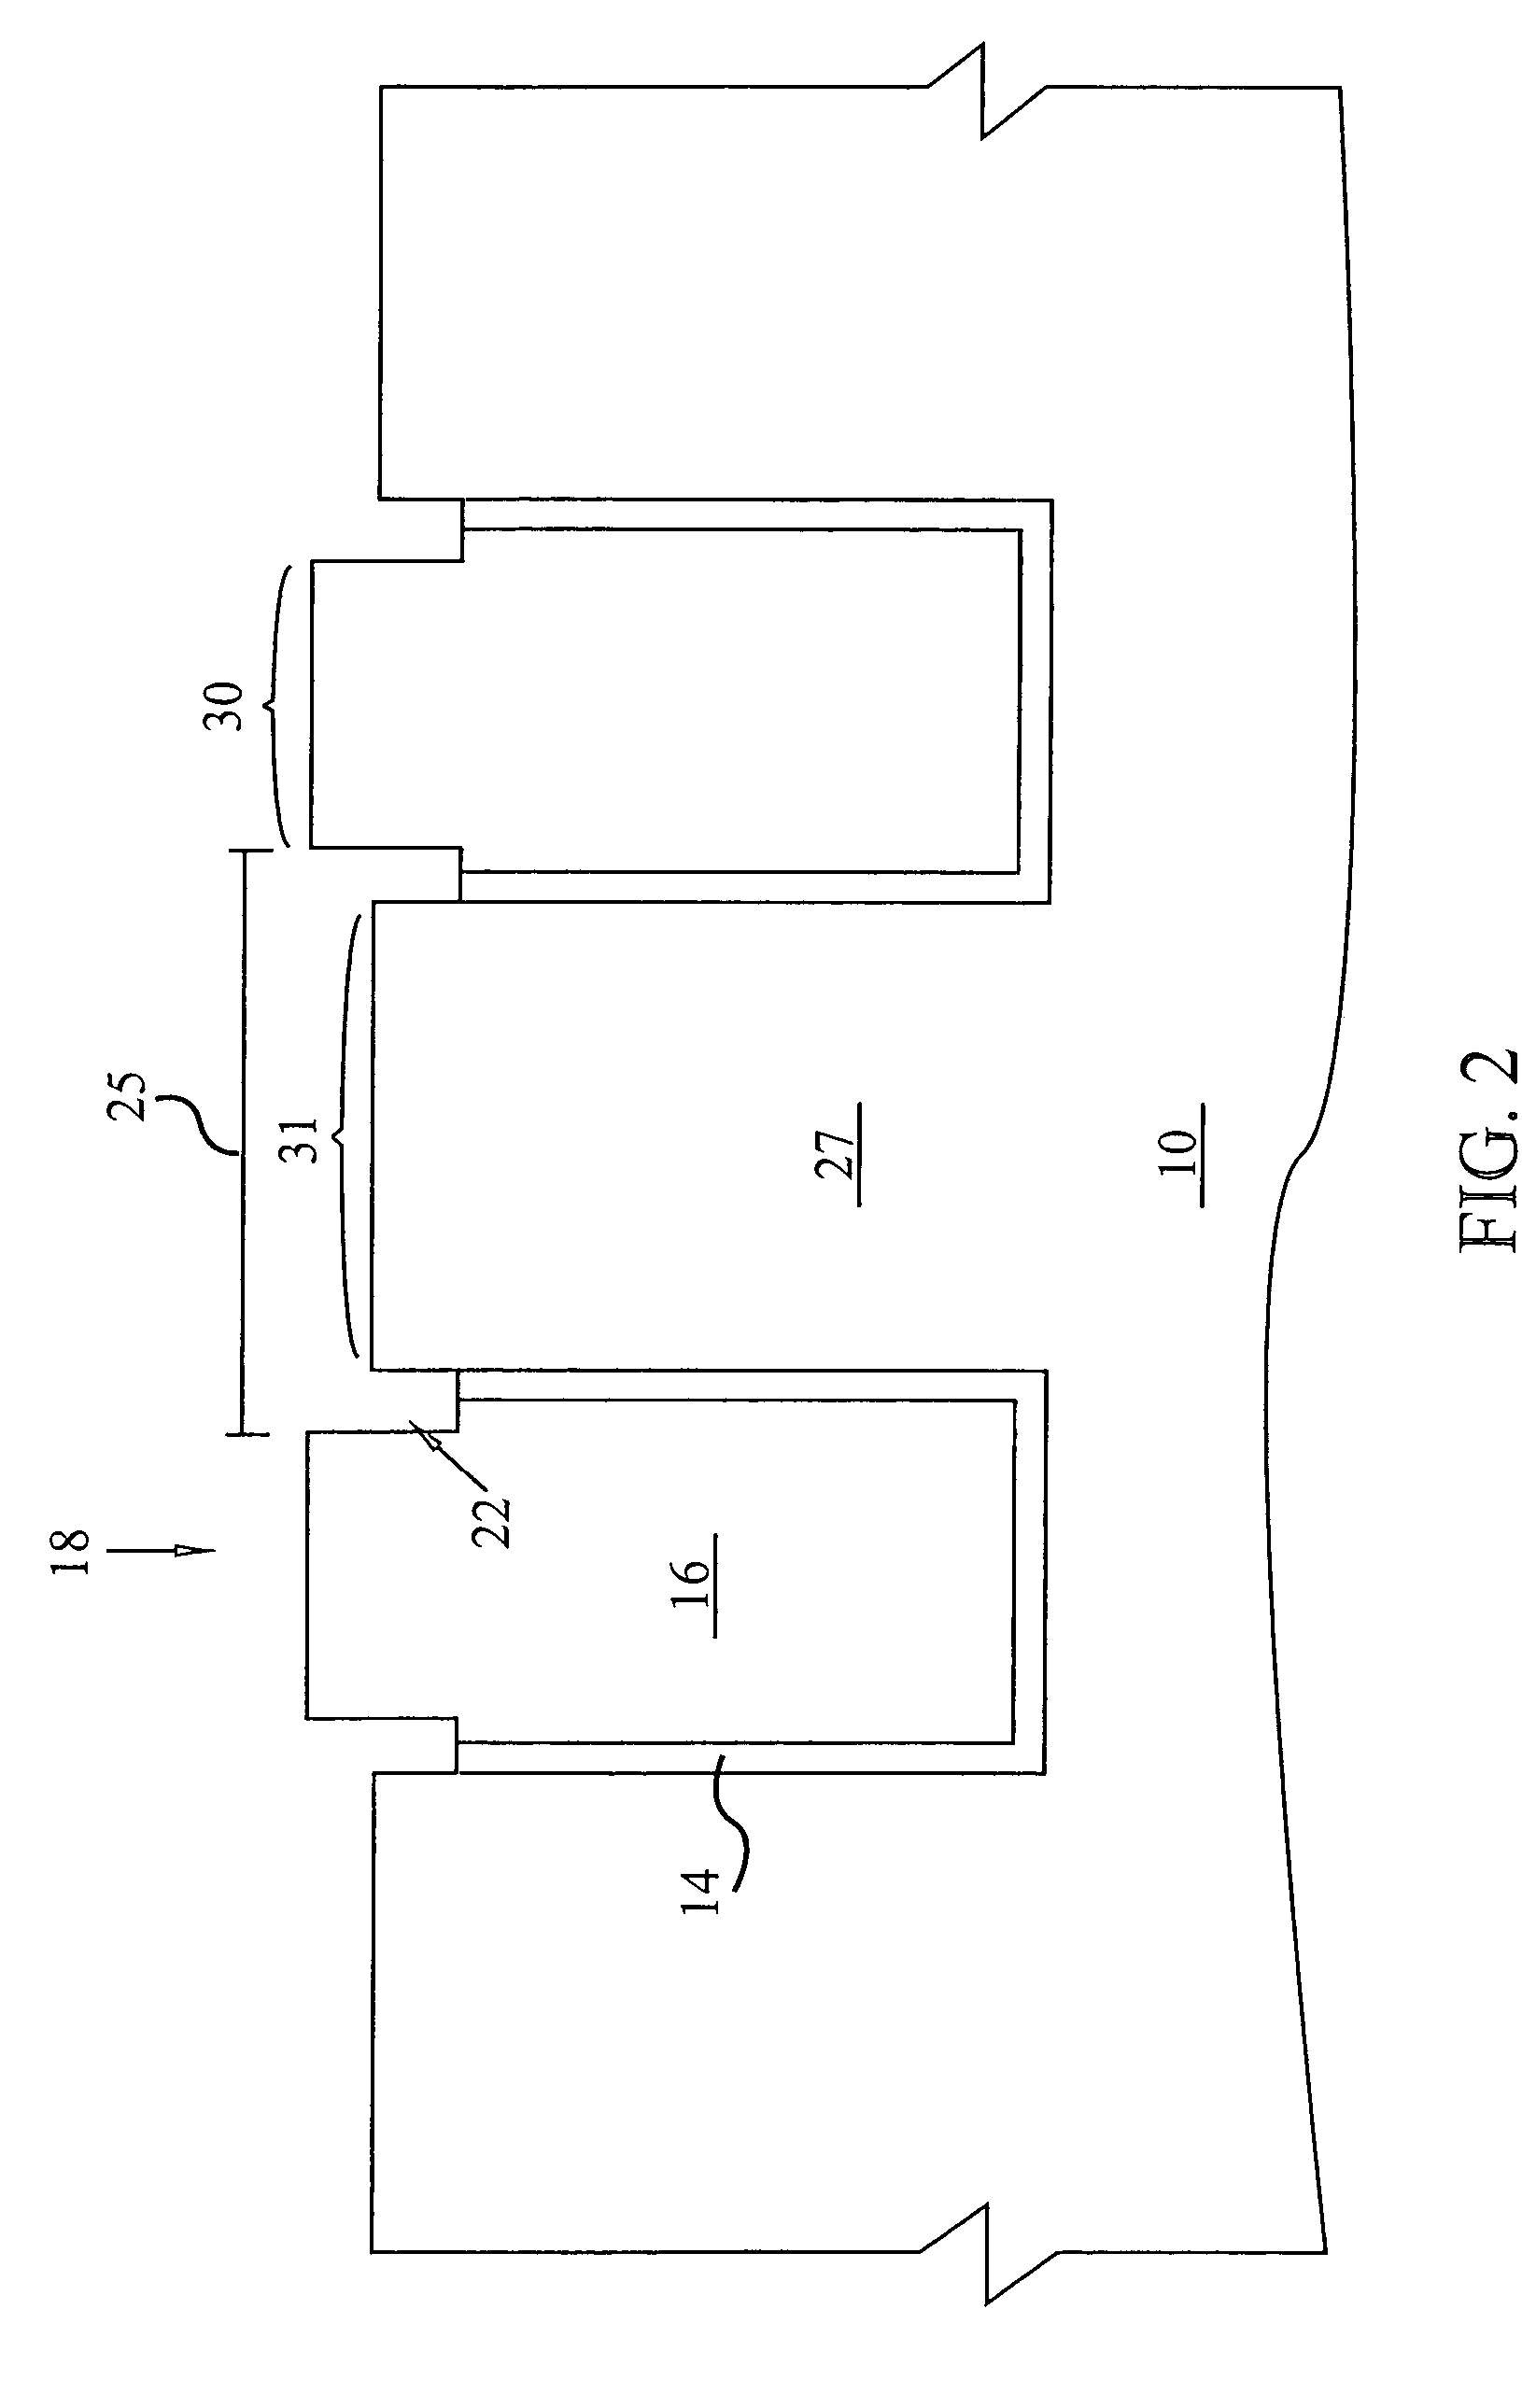 Pitcher-shaped active area for field effect transistor and method of forming same